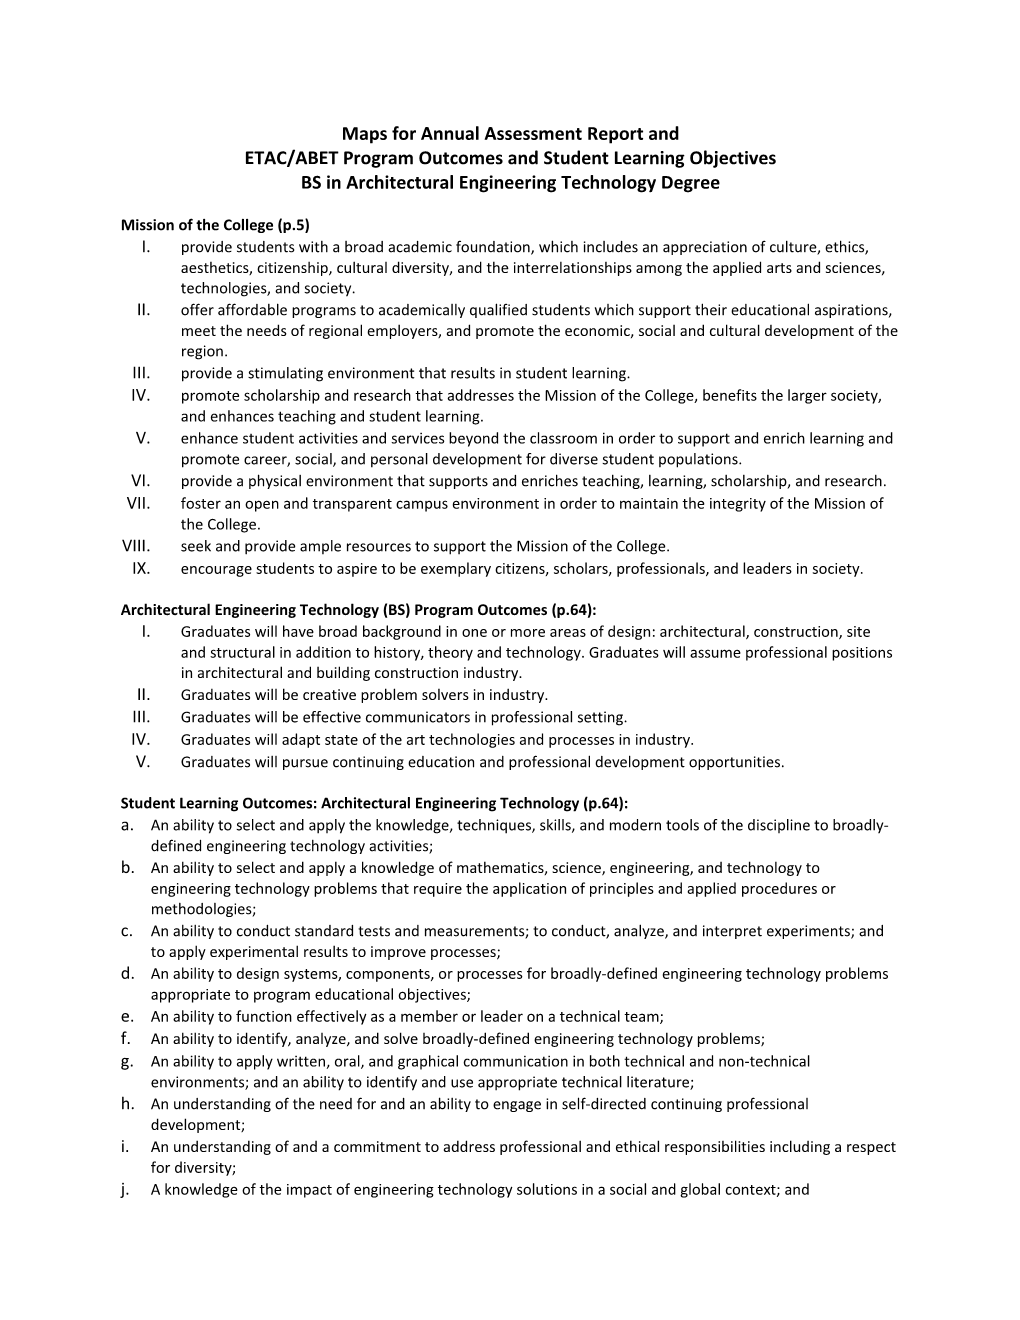 ETAC/ABET Program Outcomes and Student Learning Objectives